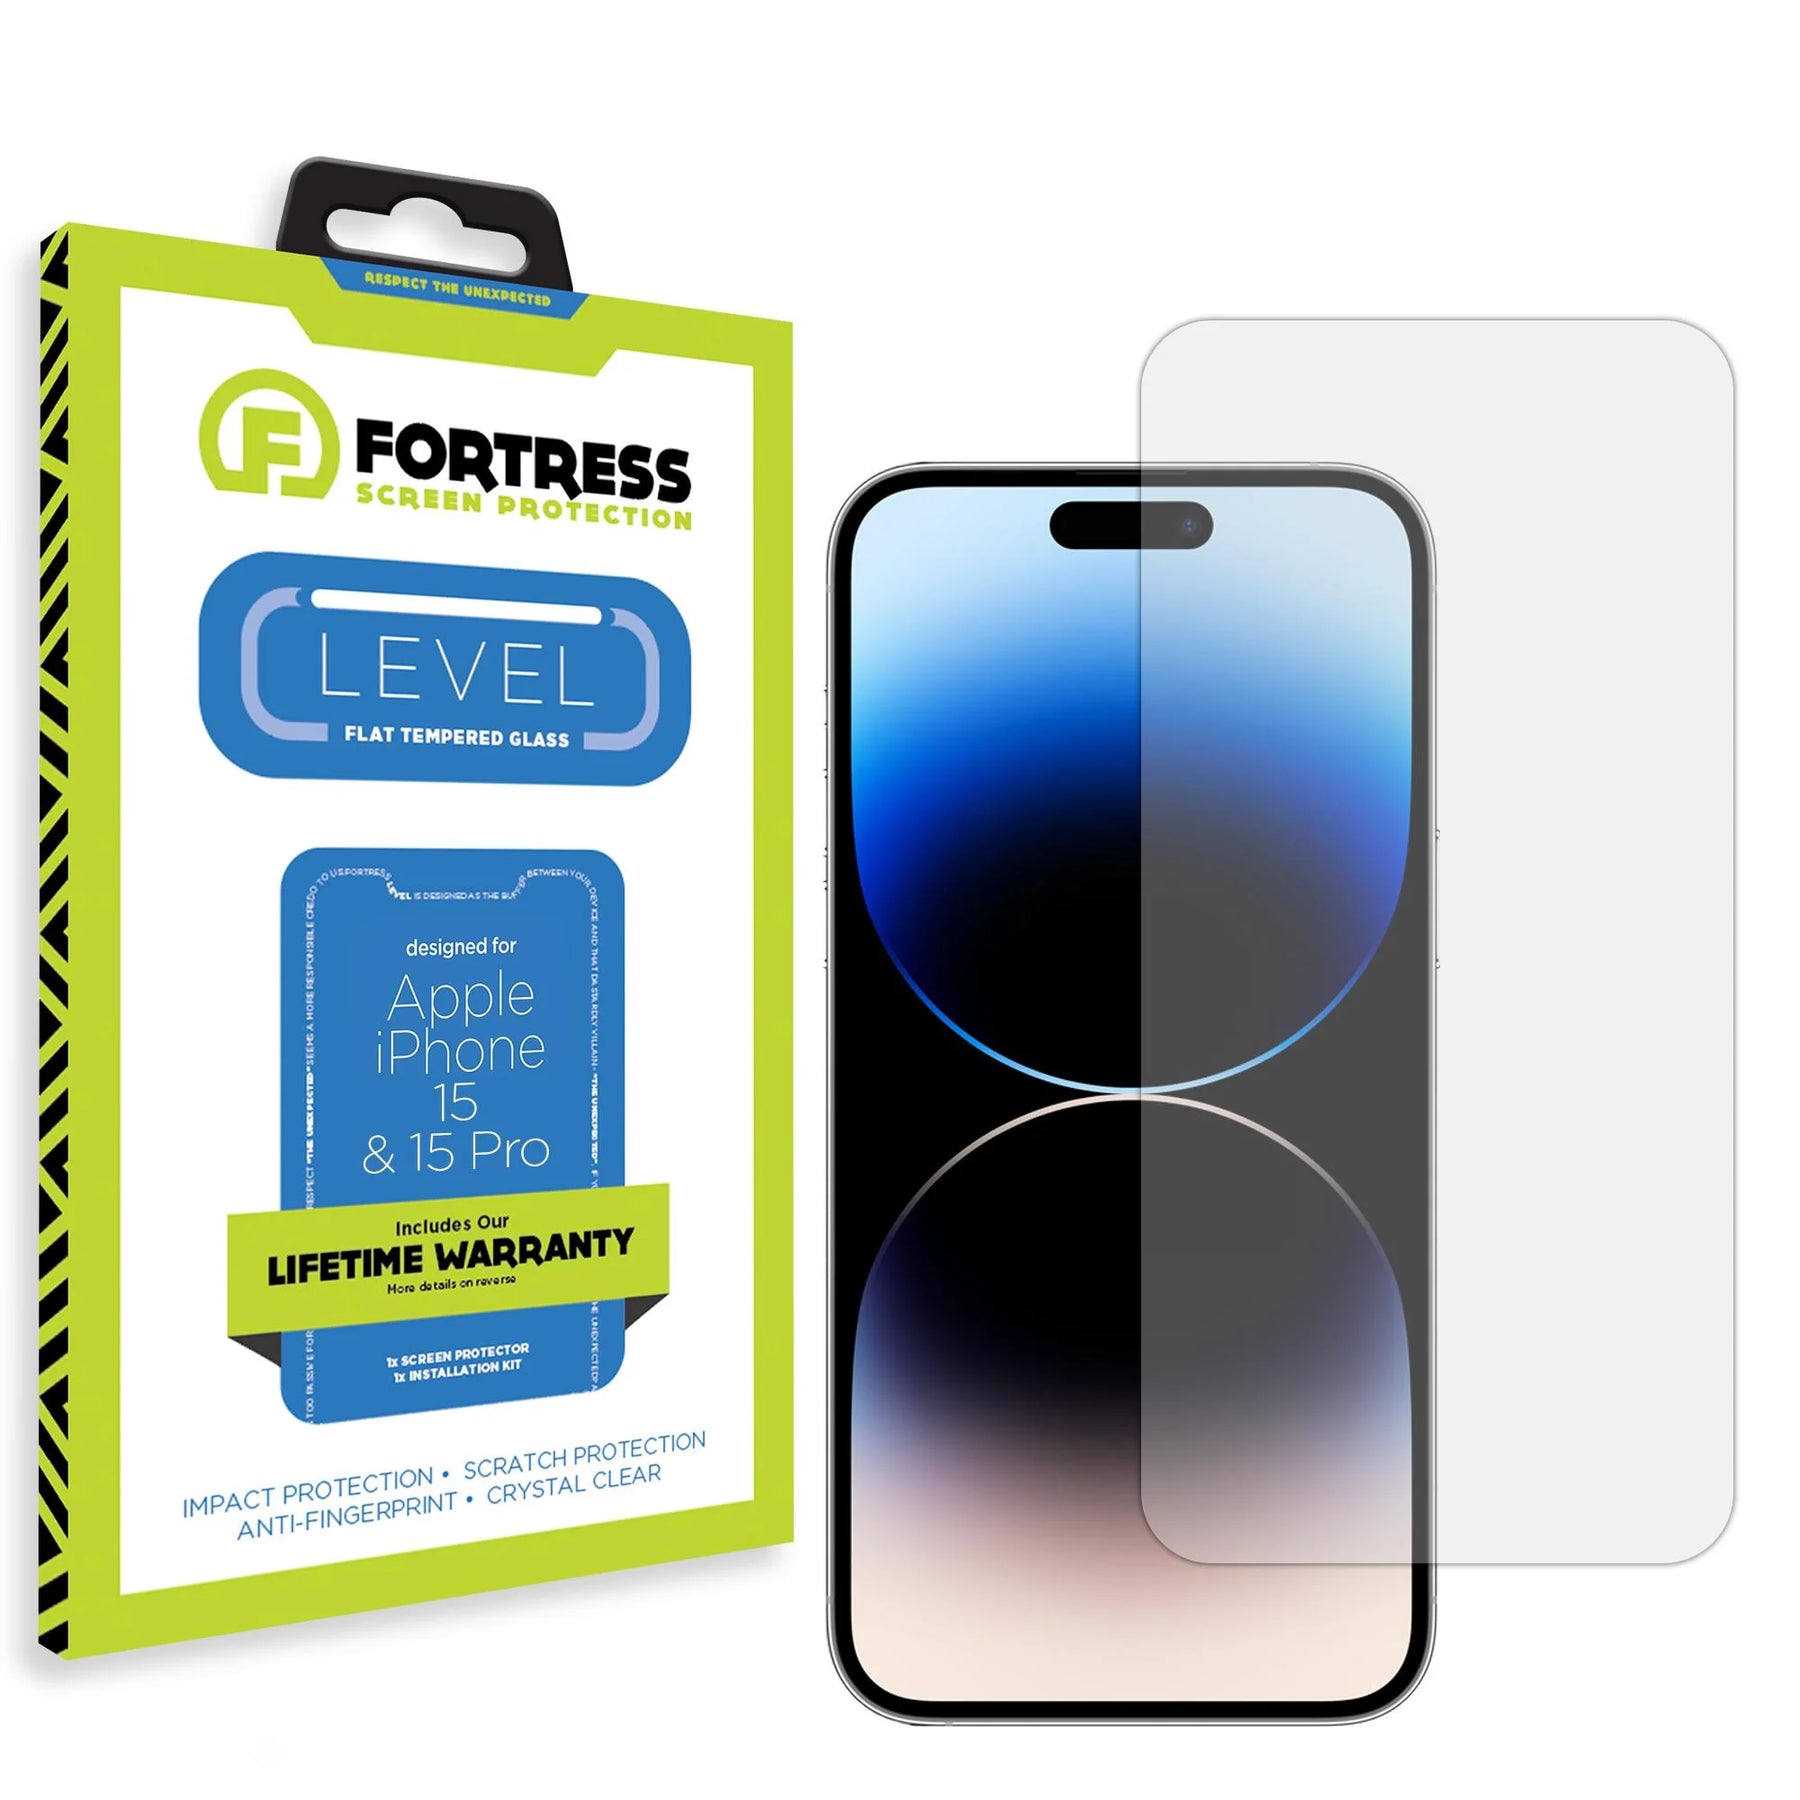 Fortress Fortress Free Screen Protector or Camera Protector (Just Pay Shipping) Apple-iPhone-15-Screen-Protector  0.00